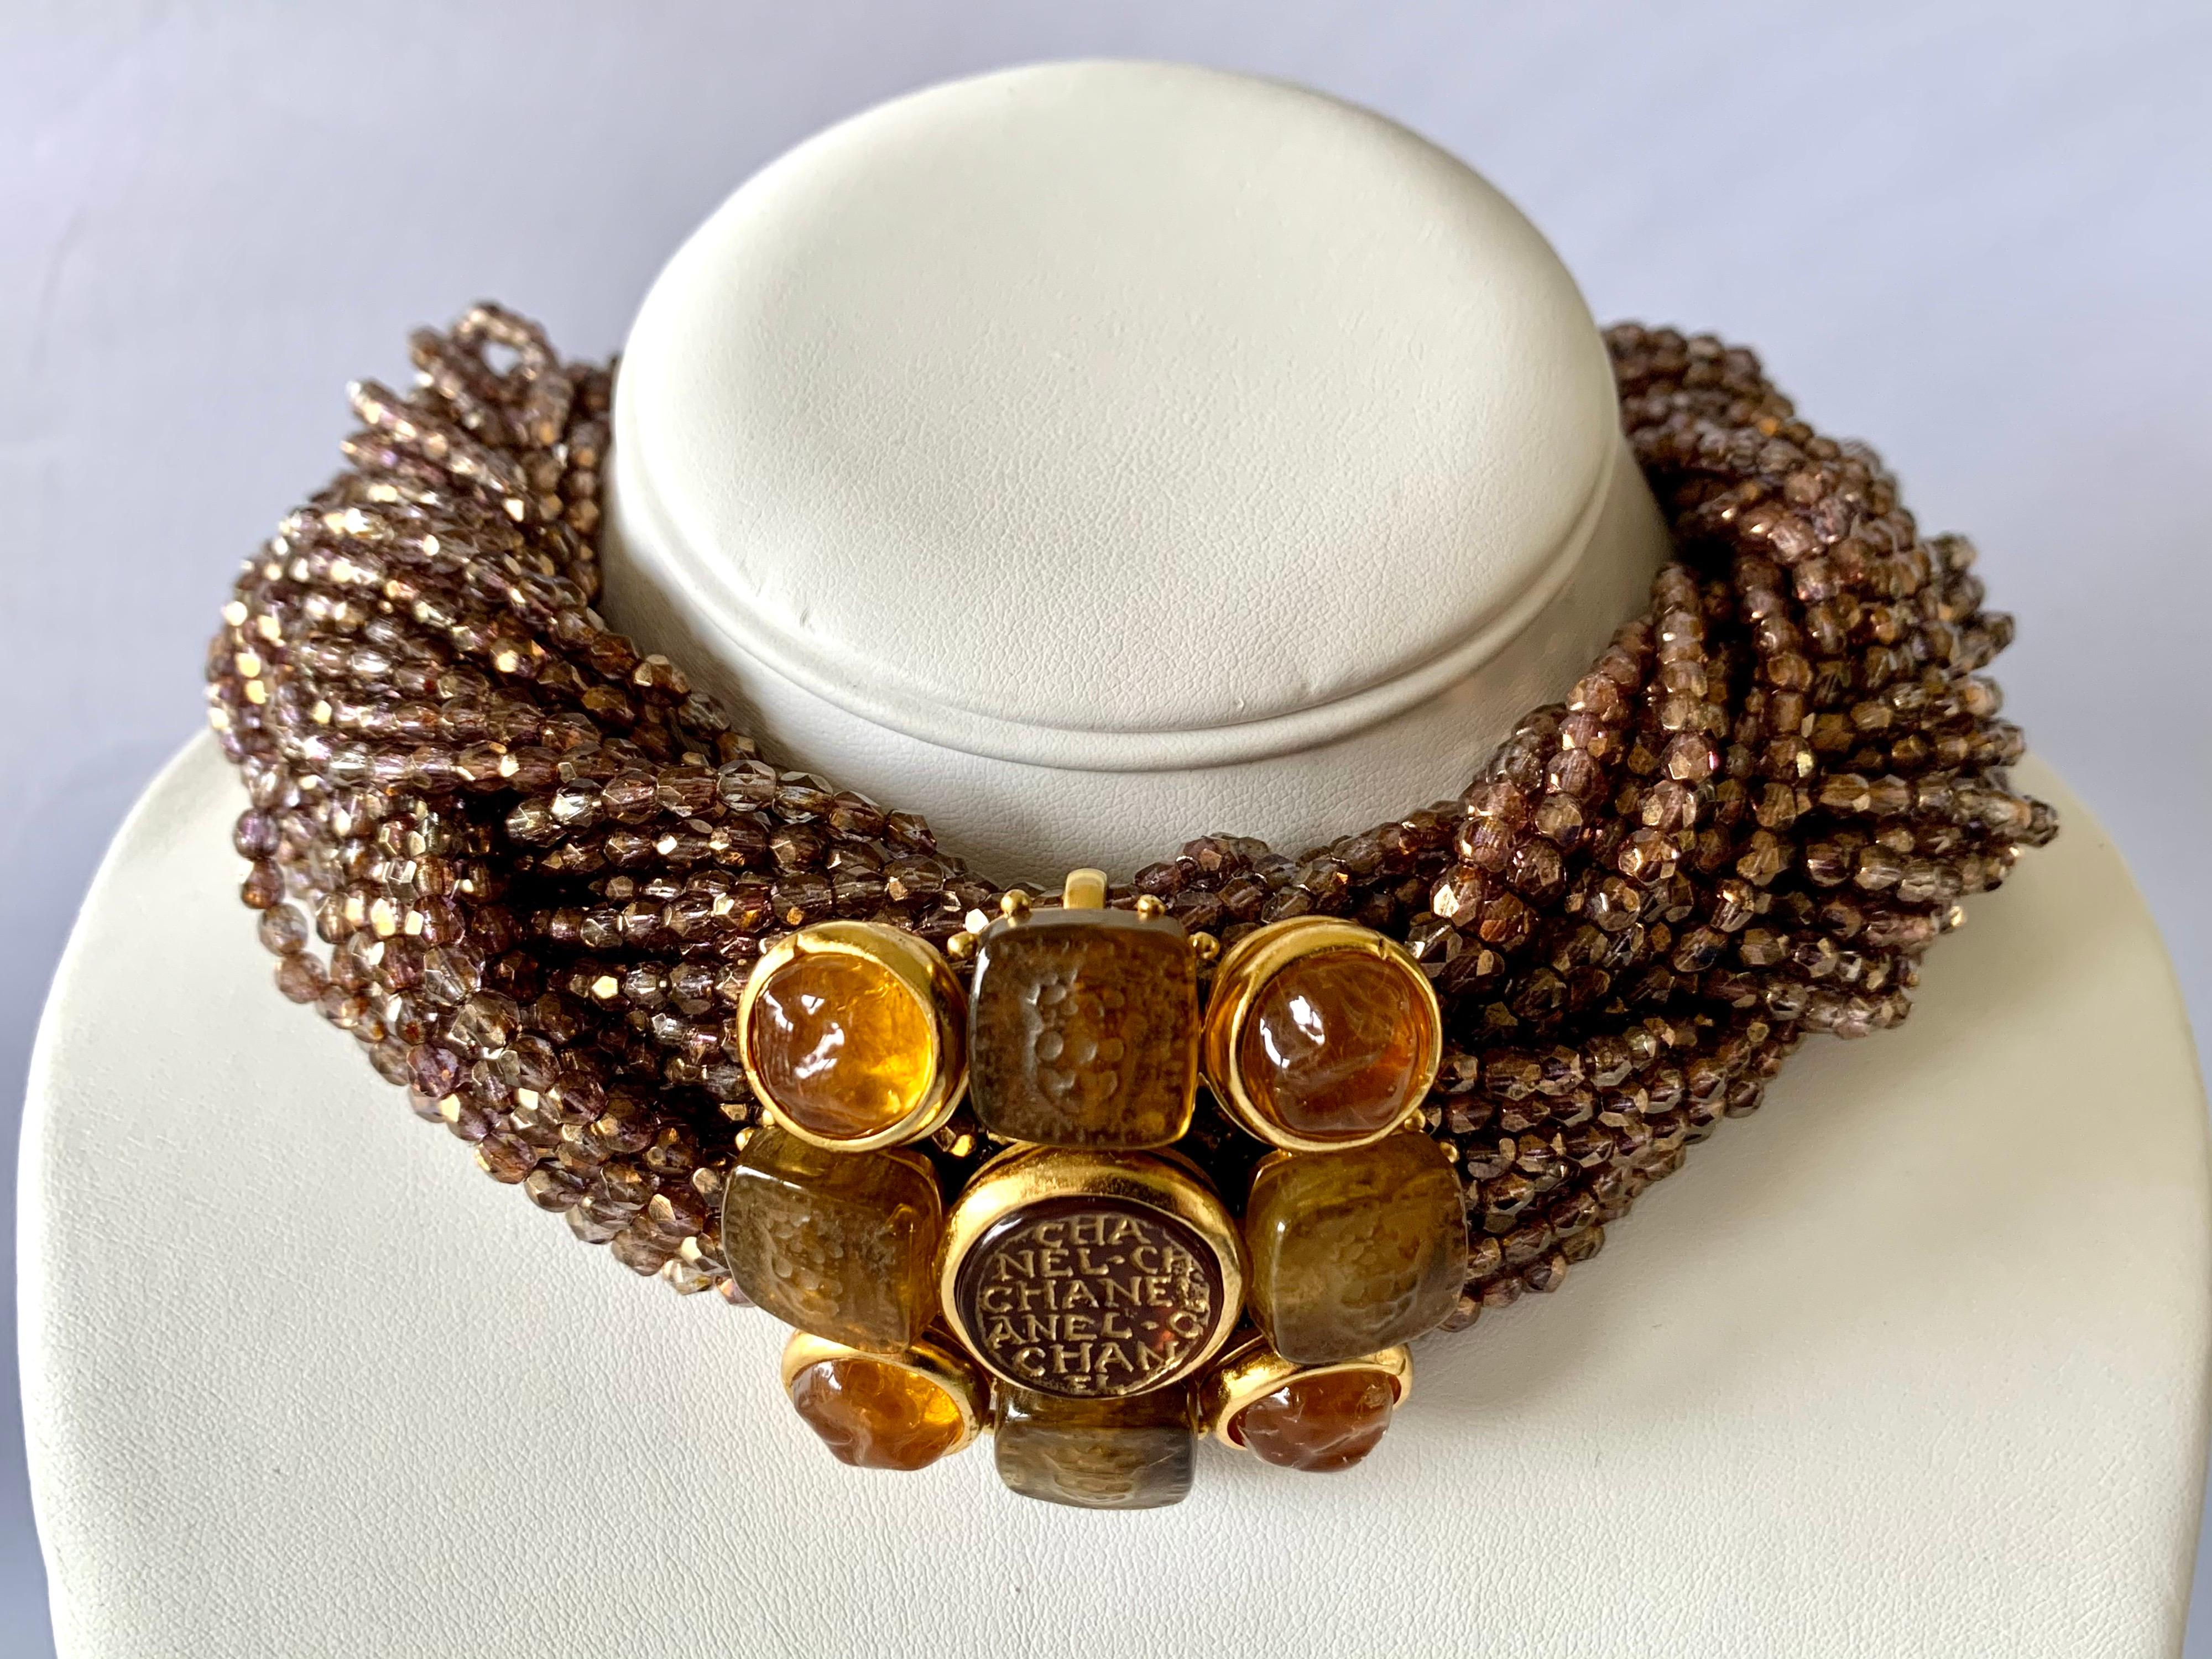 Impressive and scarce vintage Chanel Haute Couture necklace - choker comprised out of three braided strands of iridescent bronze/purple faceted glass beads. The center of the large necklace features a large gilt metal 